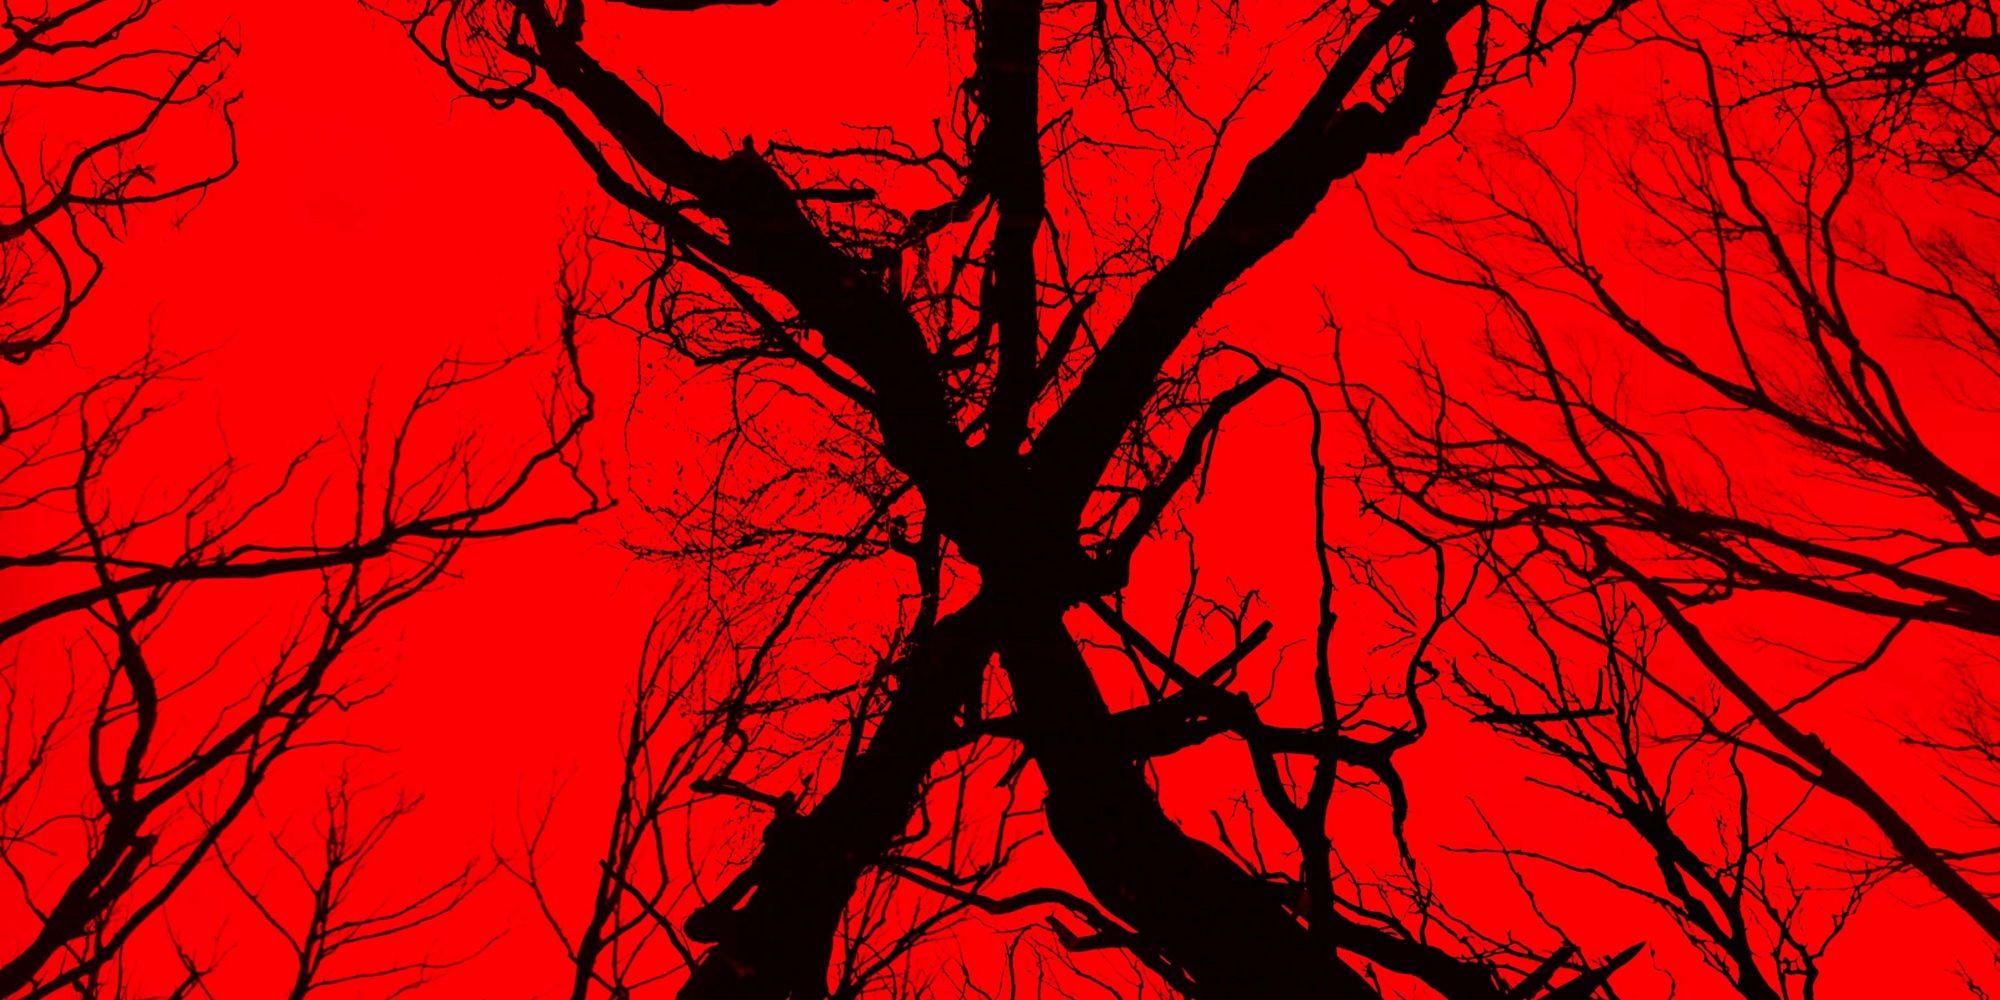 Blair Witch poster excerpt